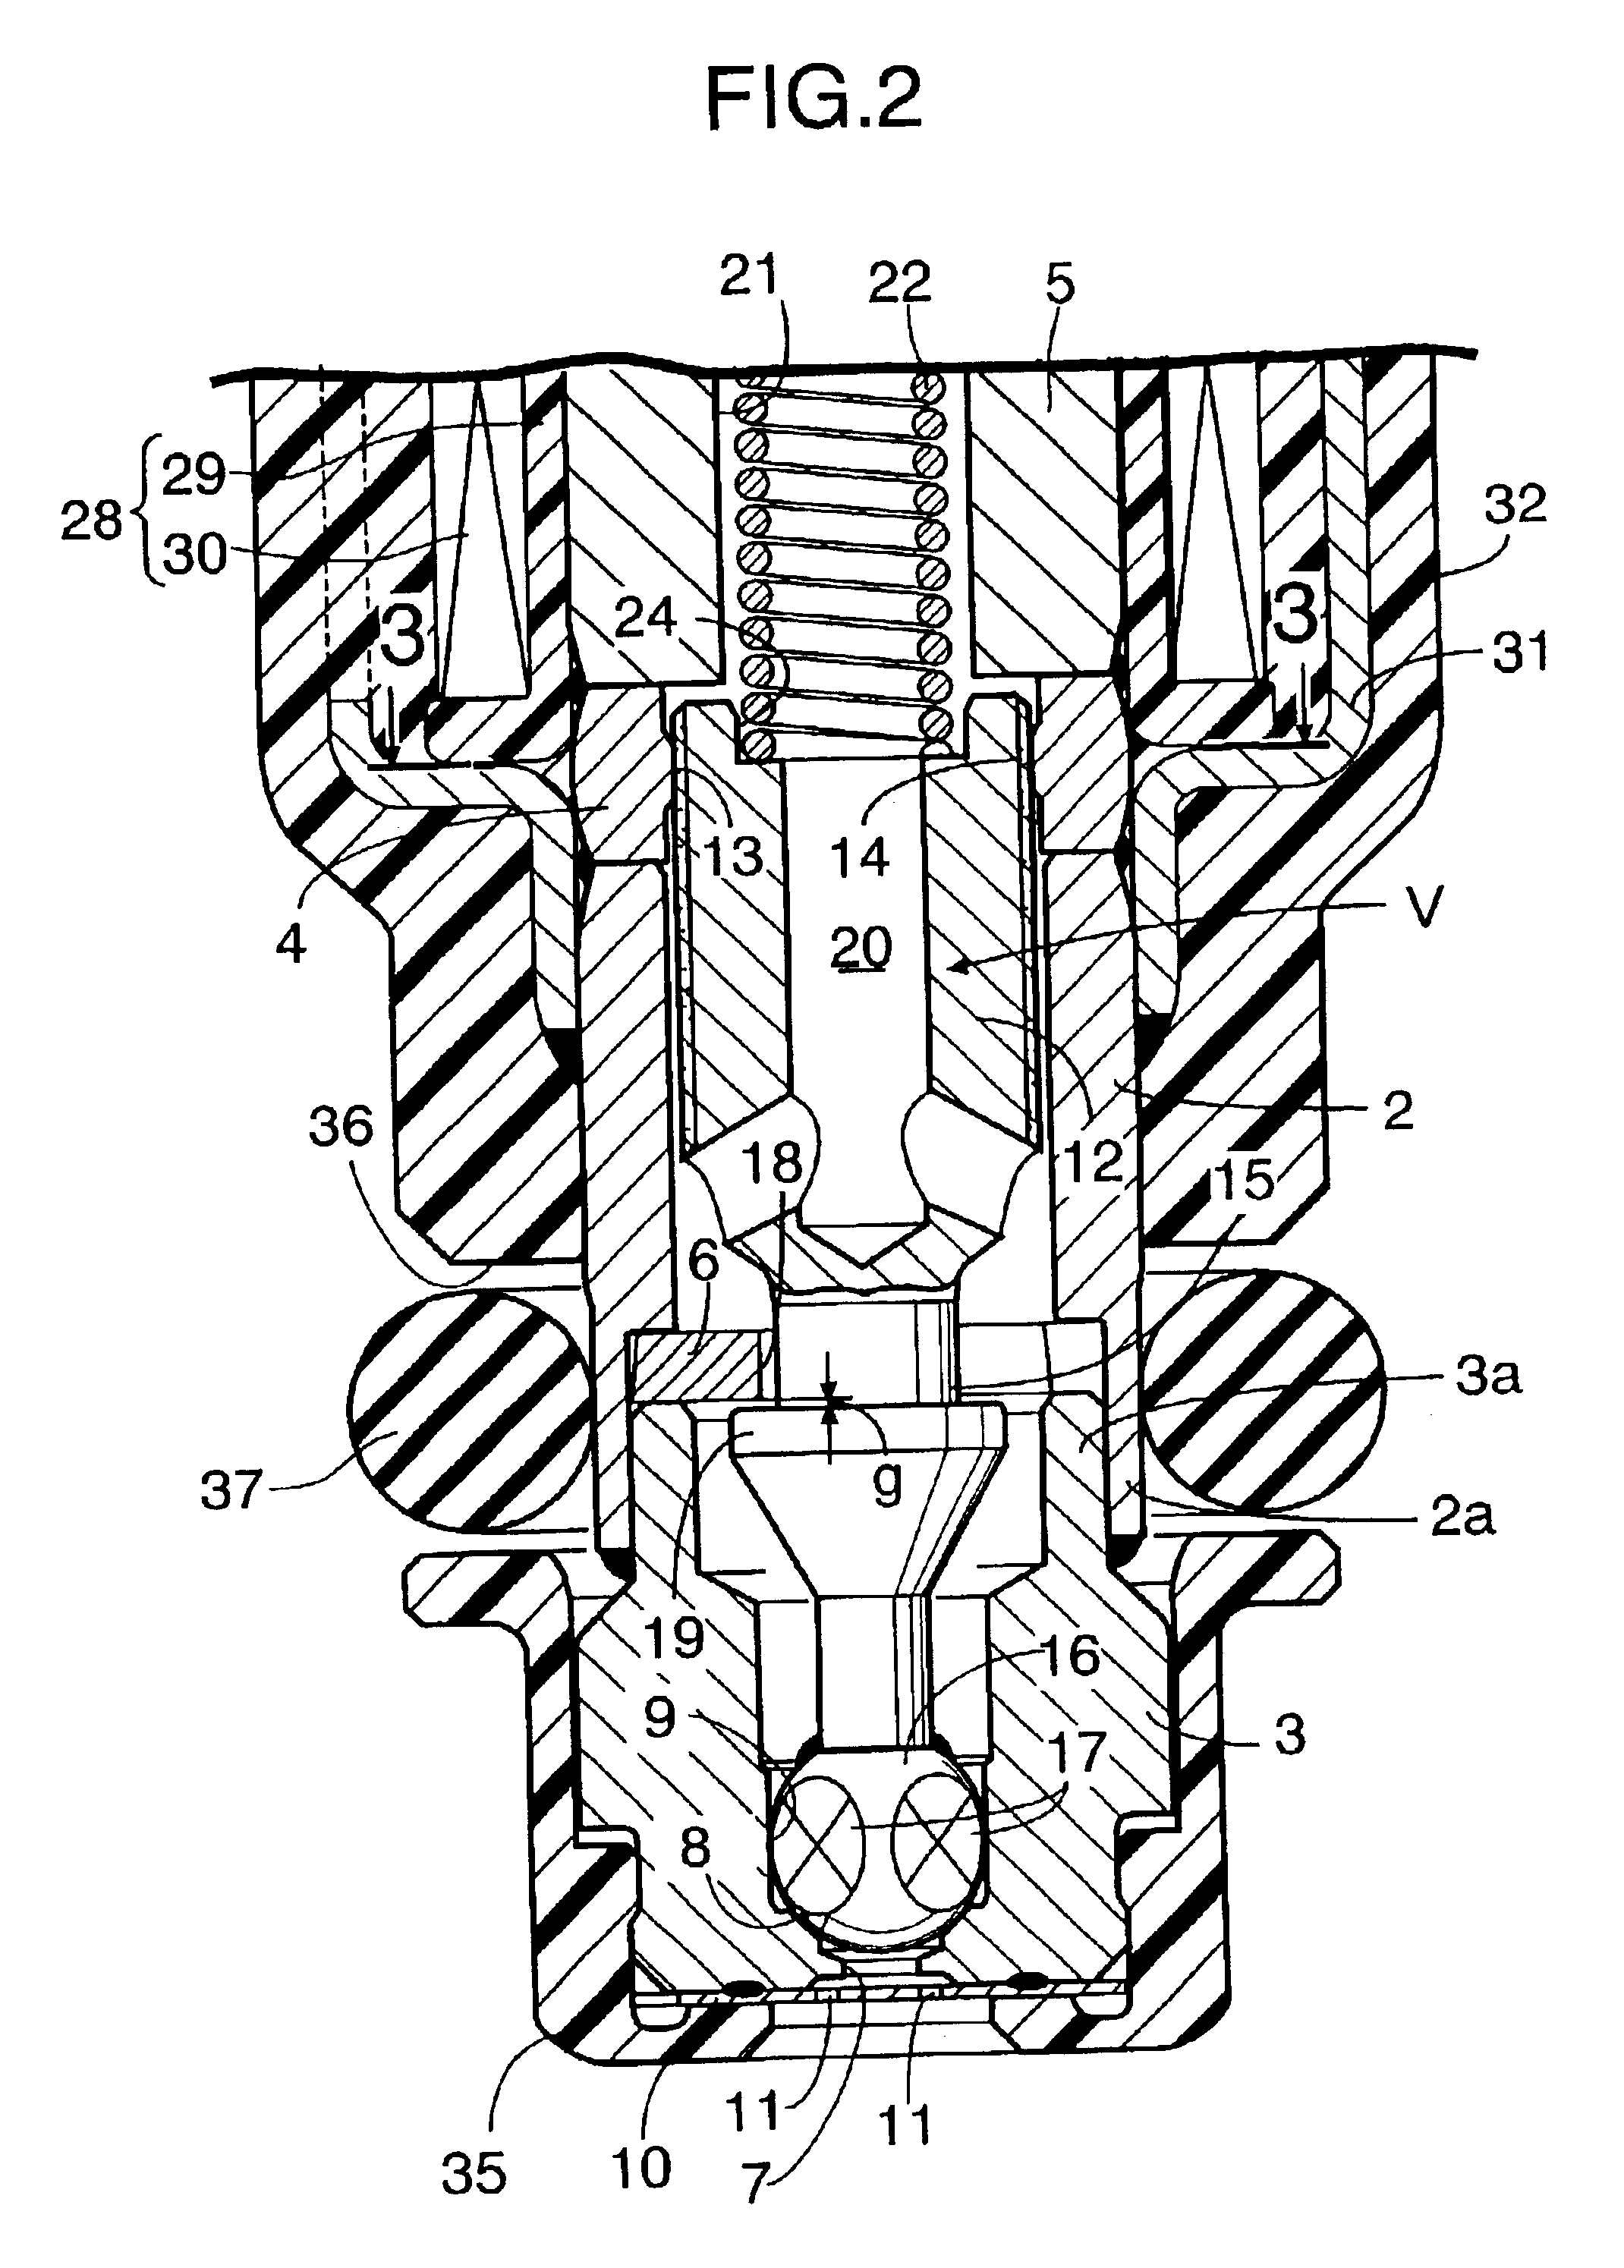 Electromagnetic fuel injection valve